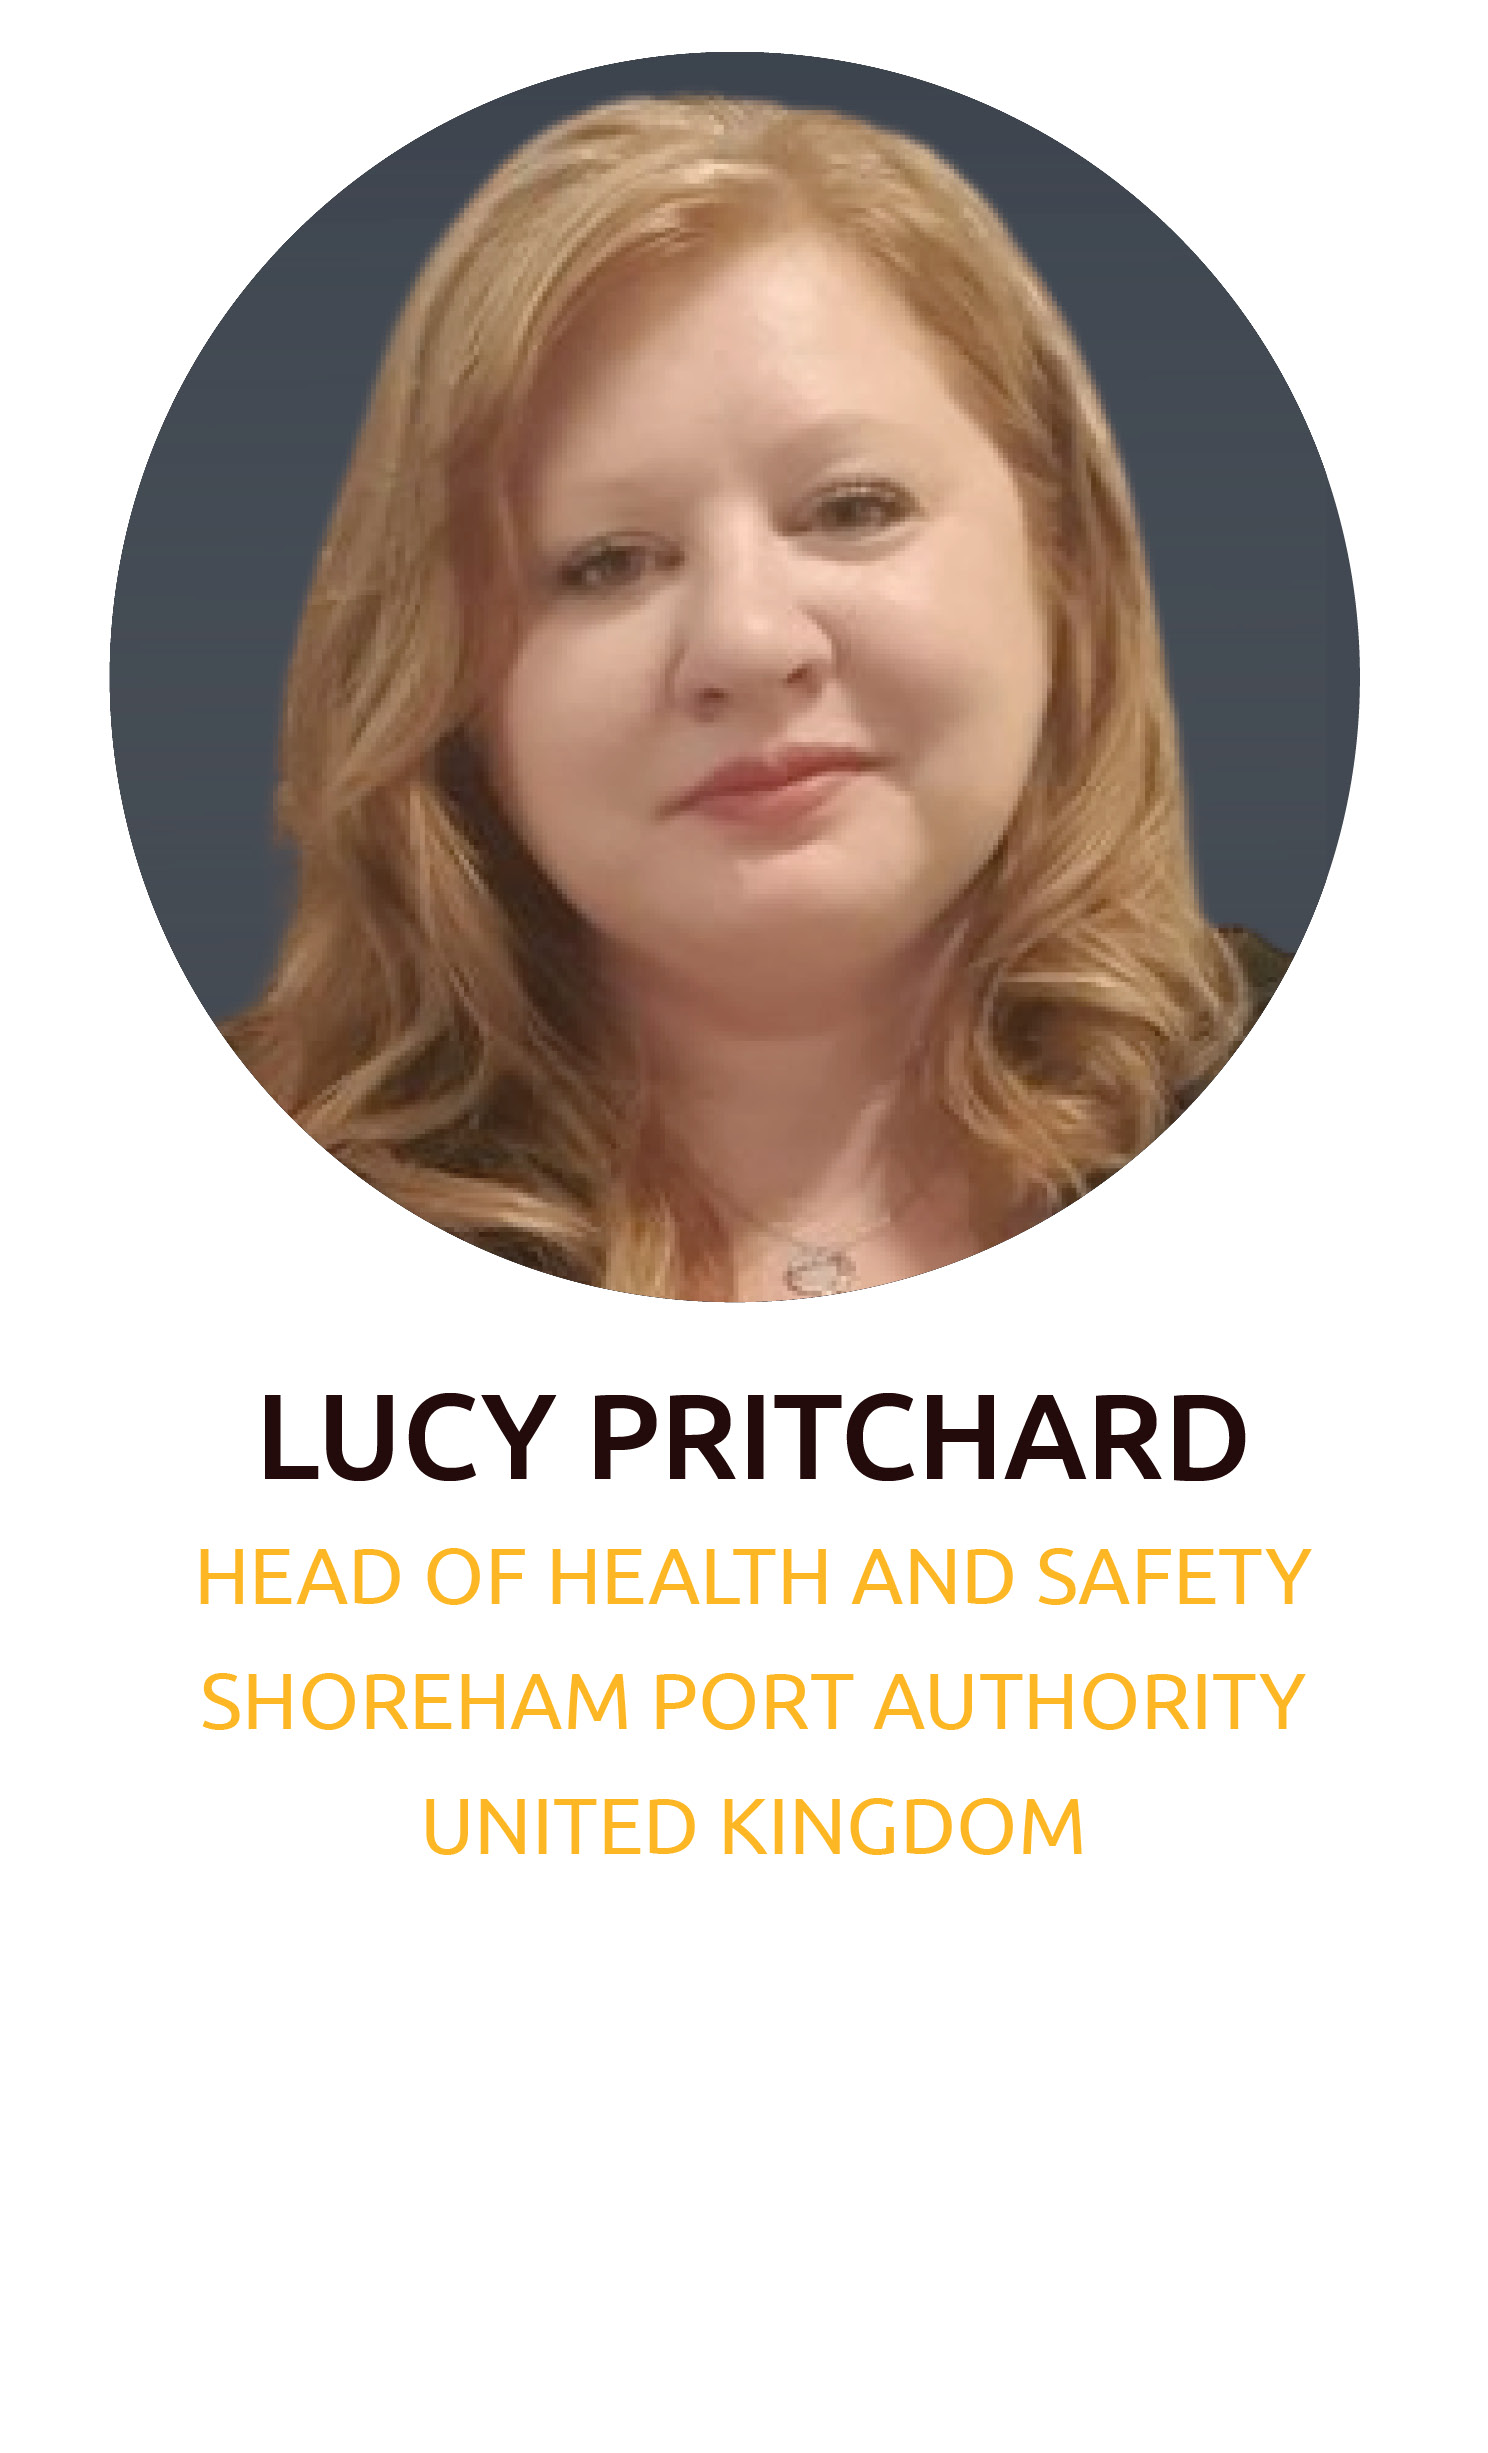 Lucy Pritchard